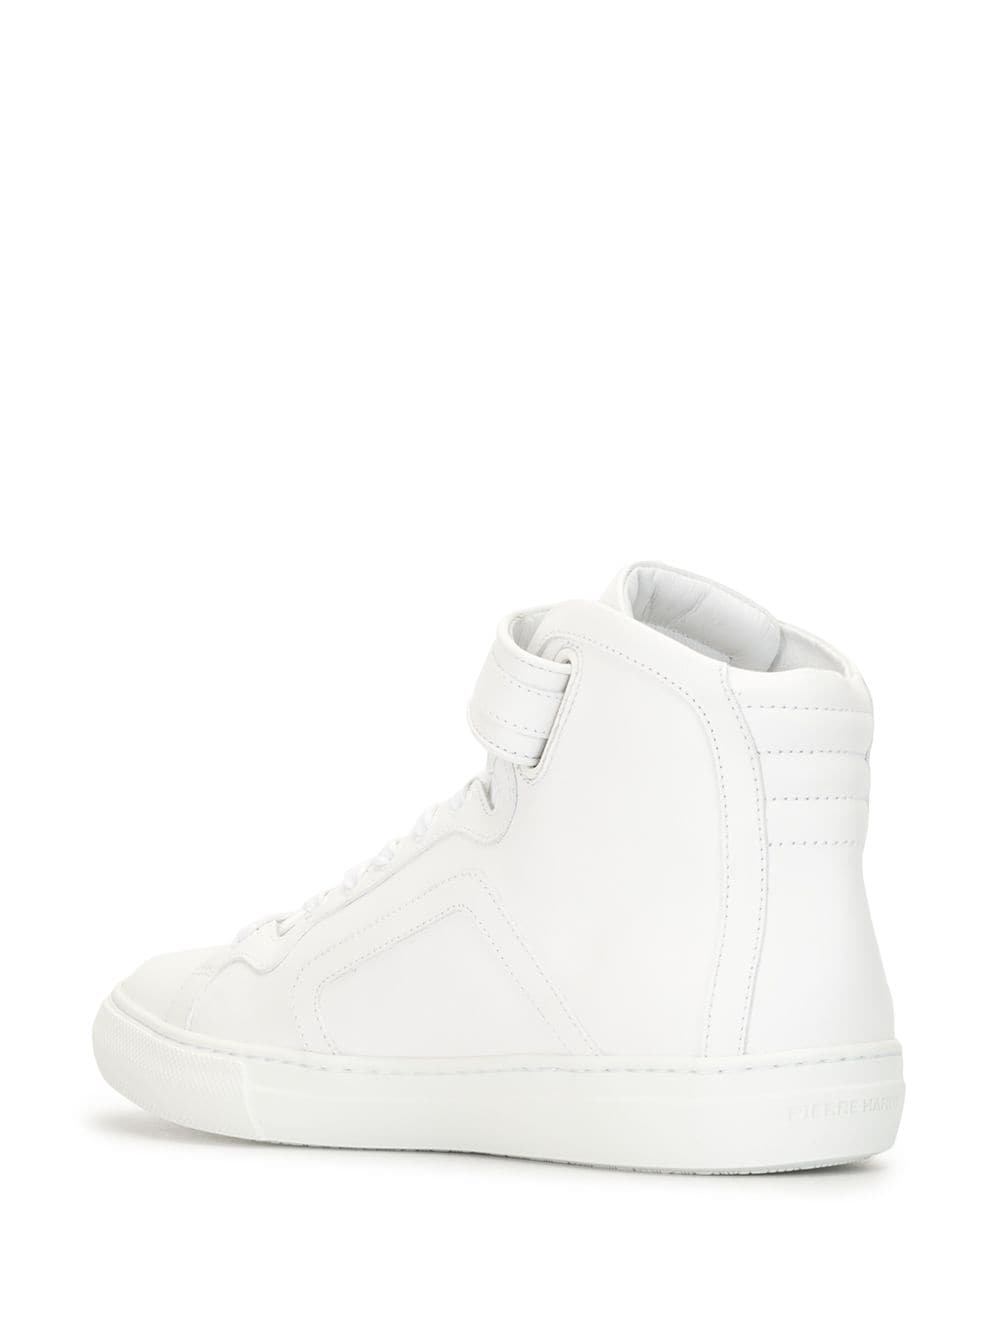 PIERRE HARDY HIGH-TOP TRAINERS